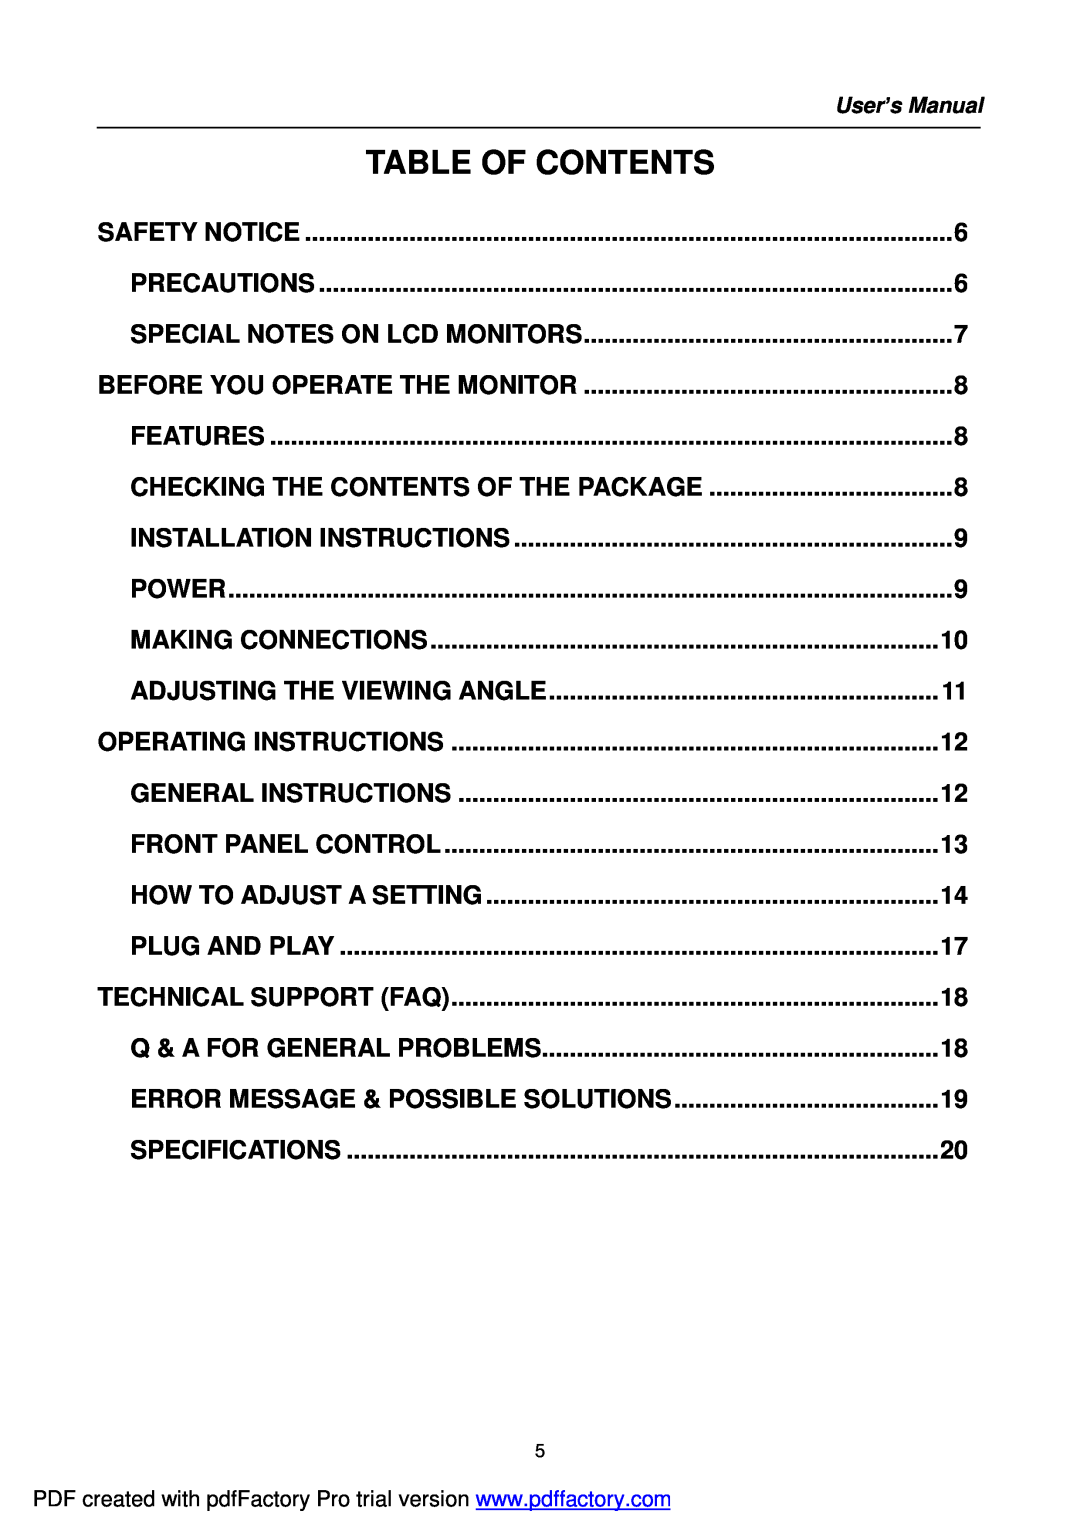 Hanns.G HI221 user manual Table Of Contents 